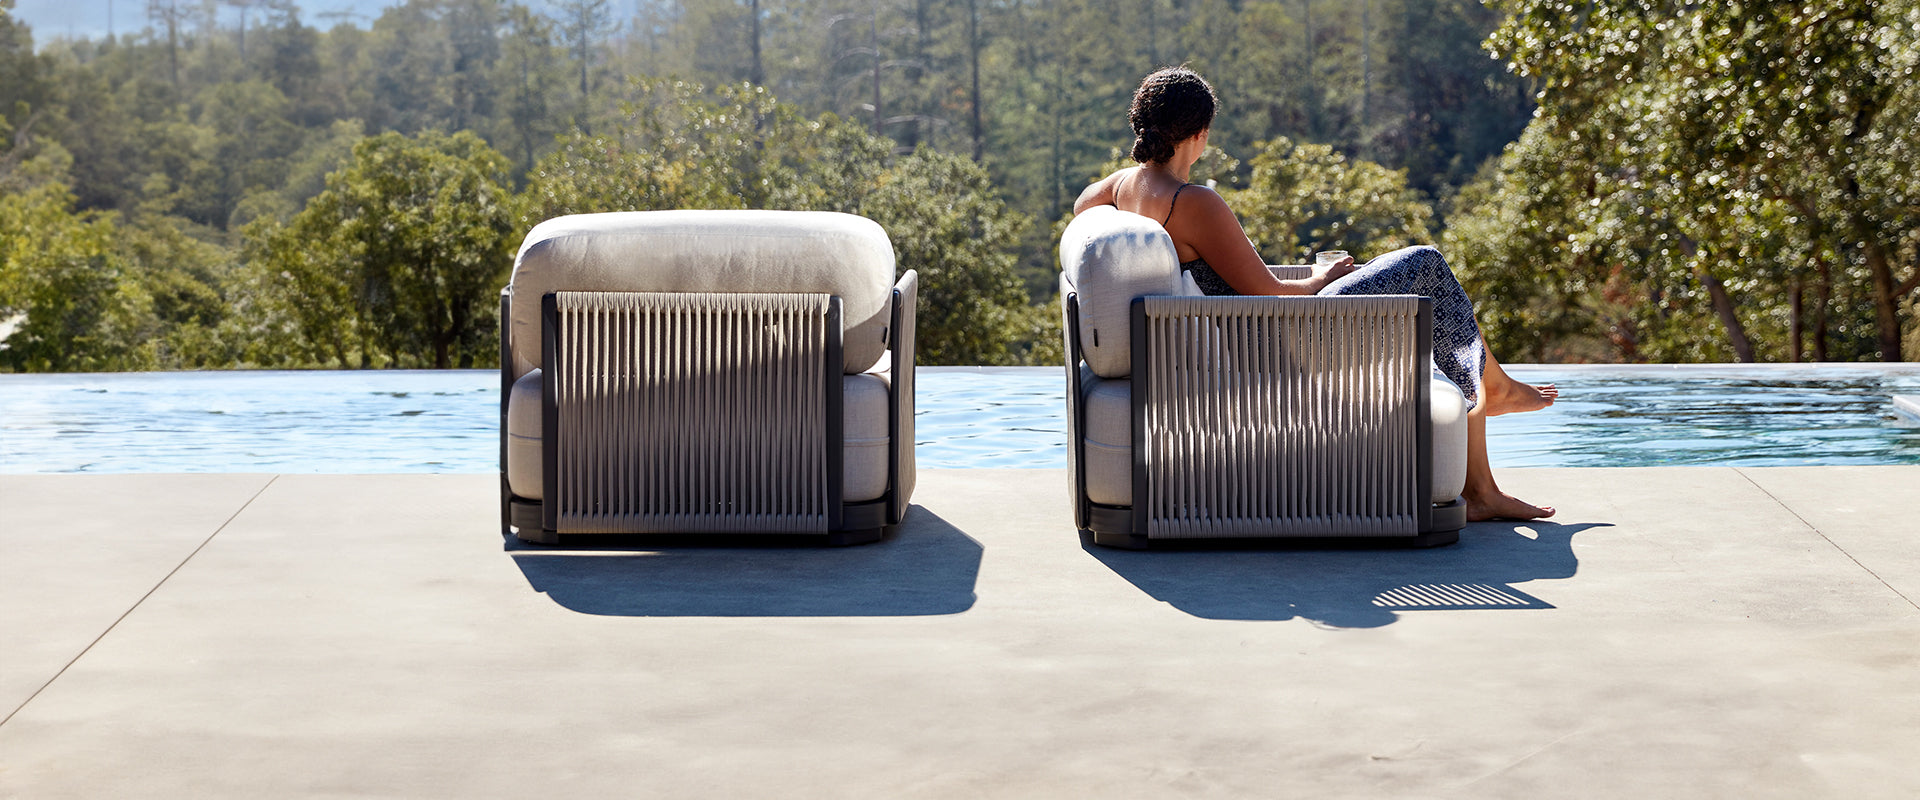 Woven Rope Outdoor Furniture - Chairs, Sofas & More